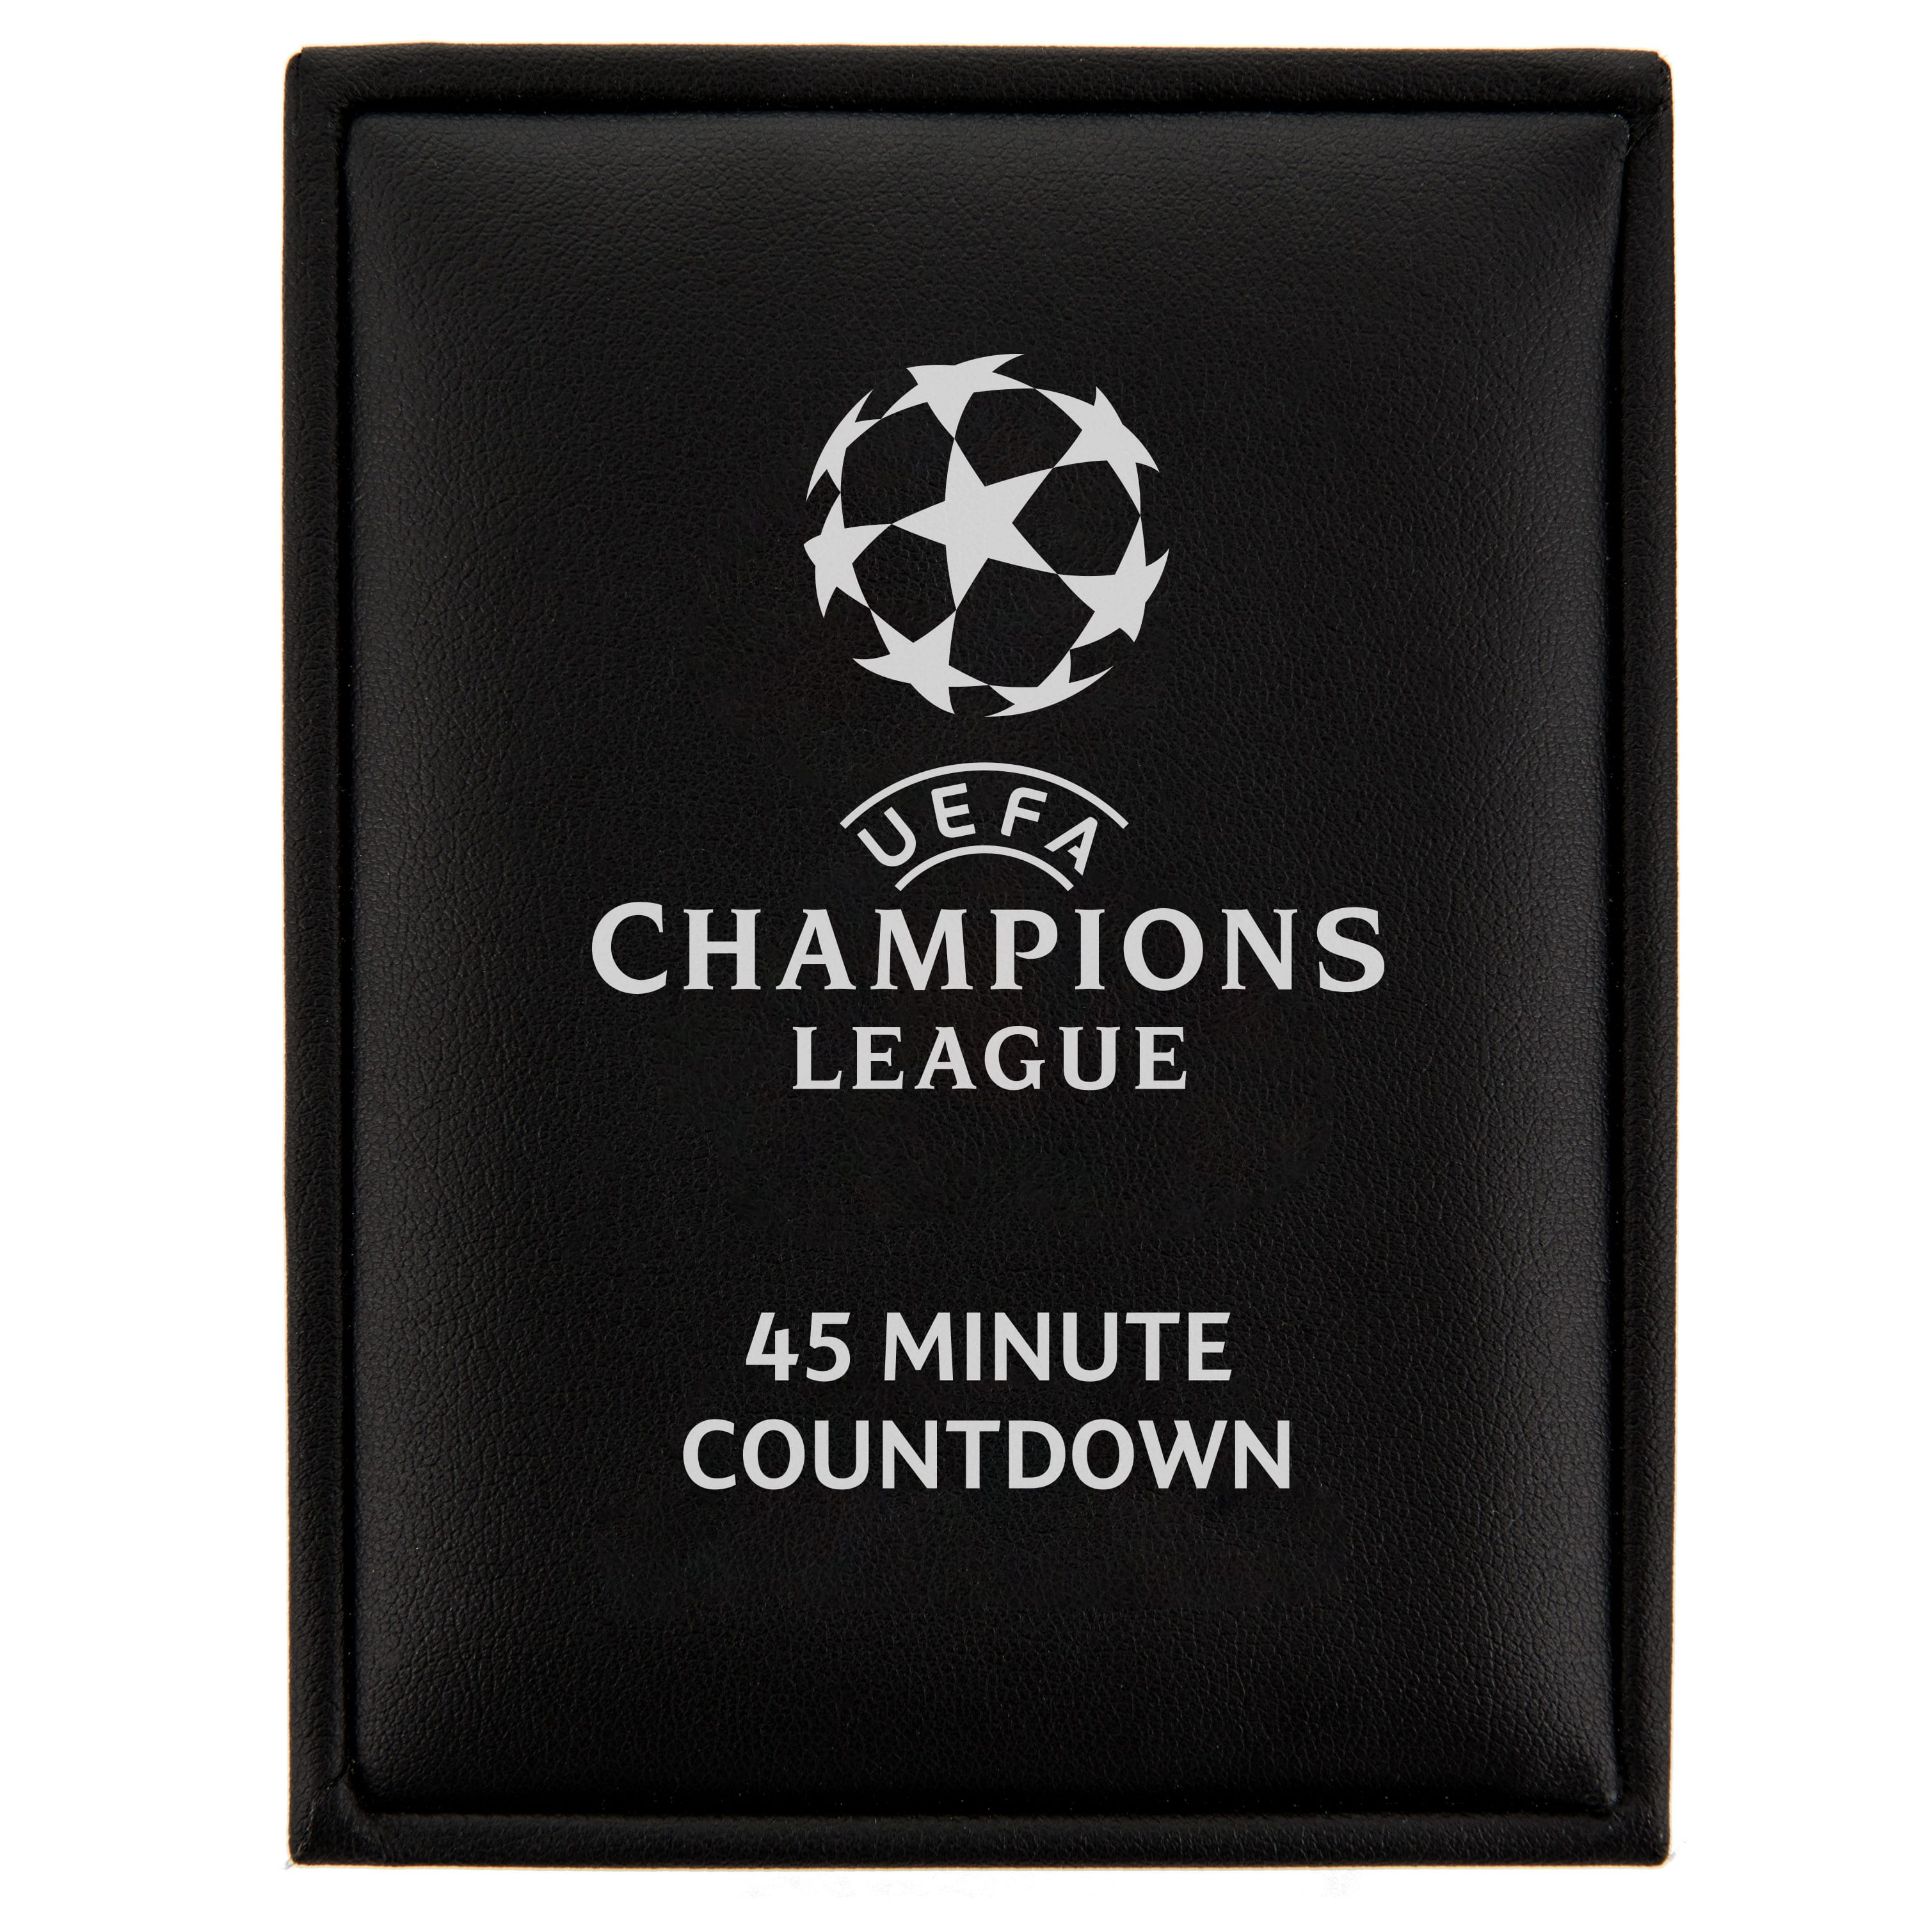 BRAND NEW OFFICIAL UEFA CHAMPIONS LEAGUE 45 MINUTE COUNTDOWN WATCH CL45-STB-GRBLP, RRP £225 - Image 5 of 5